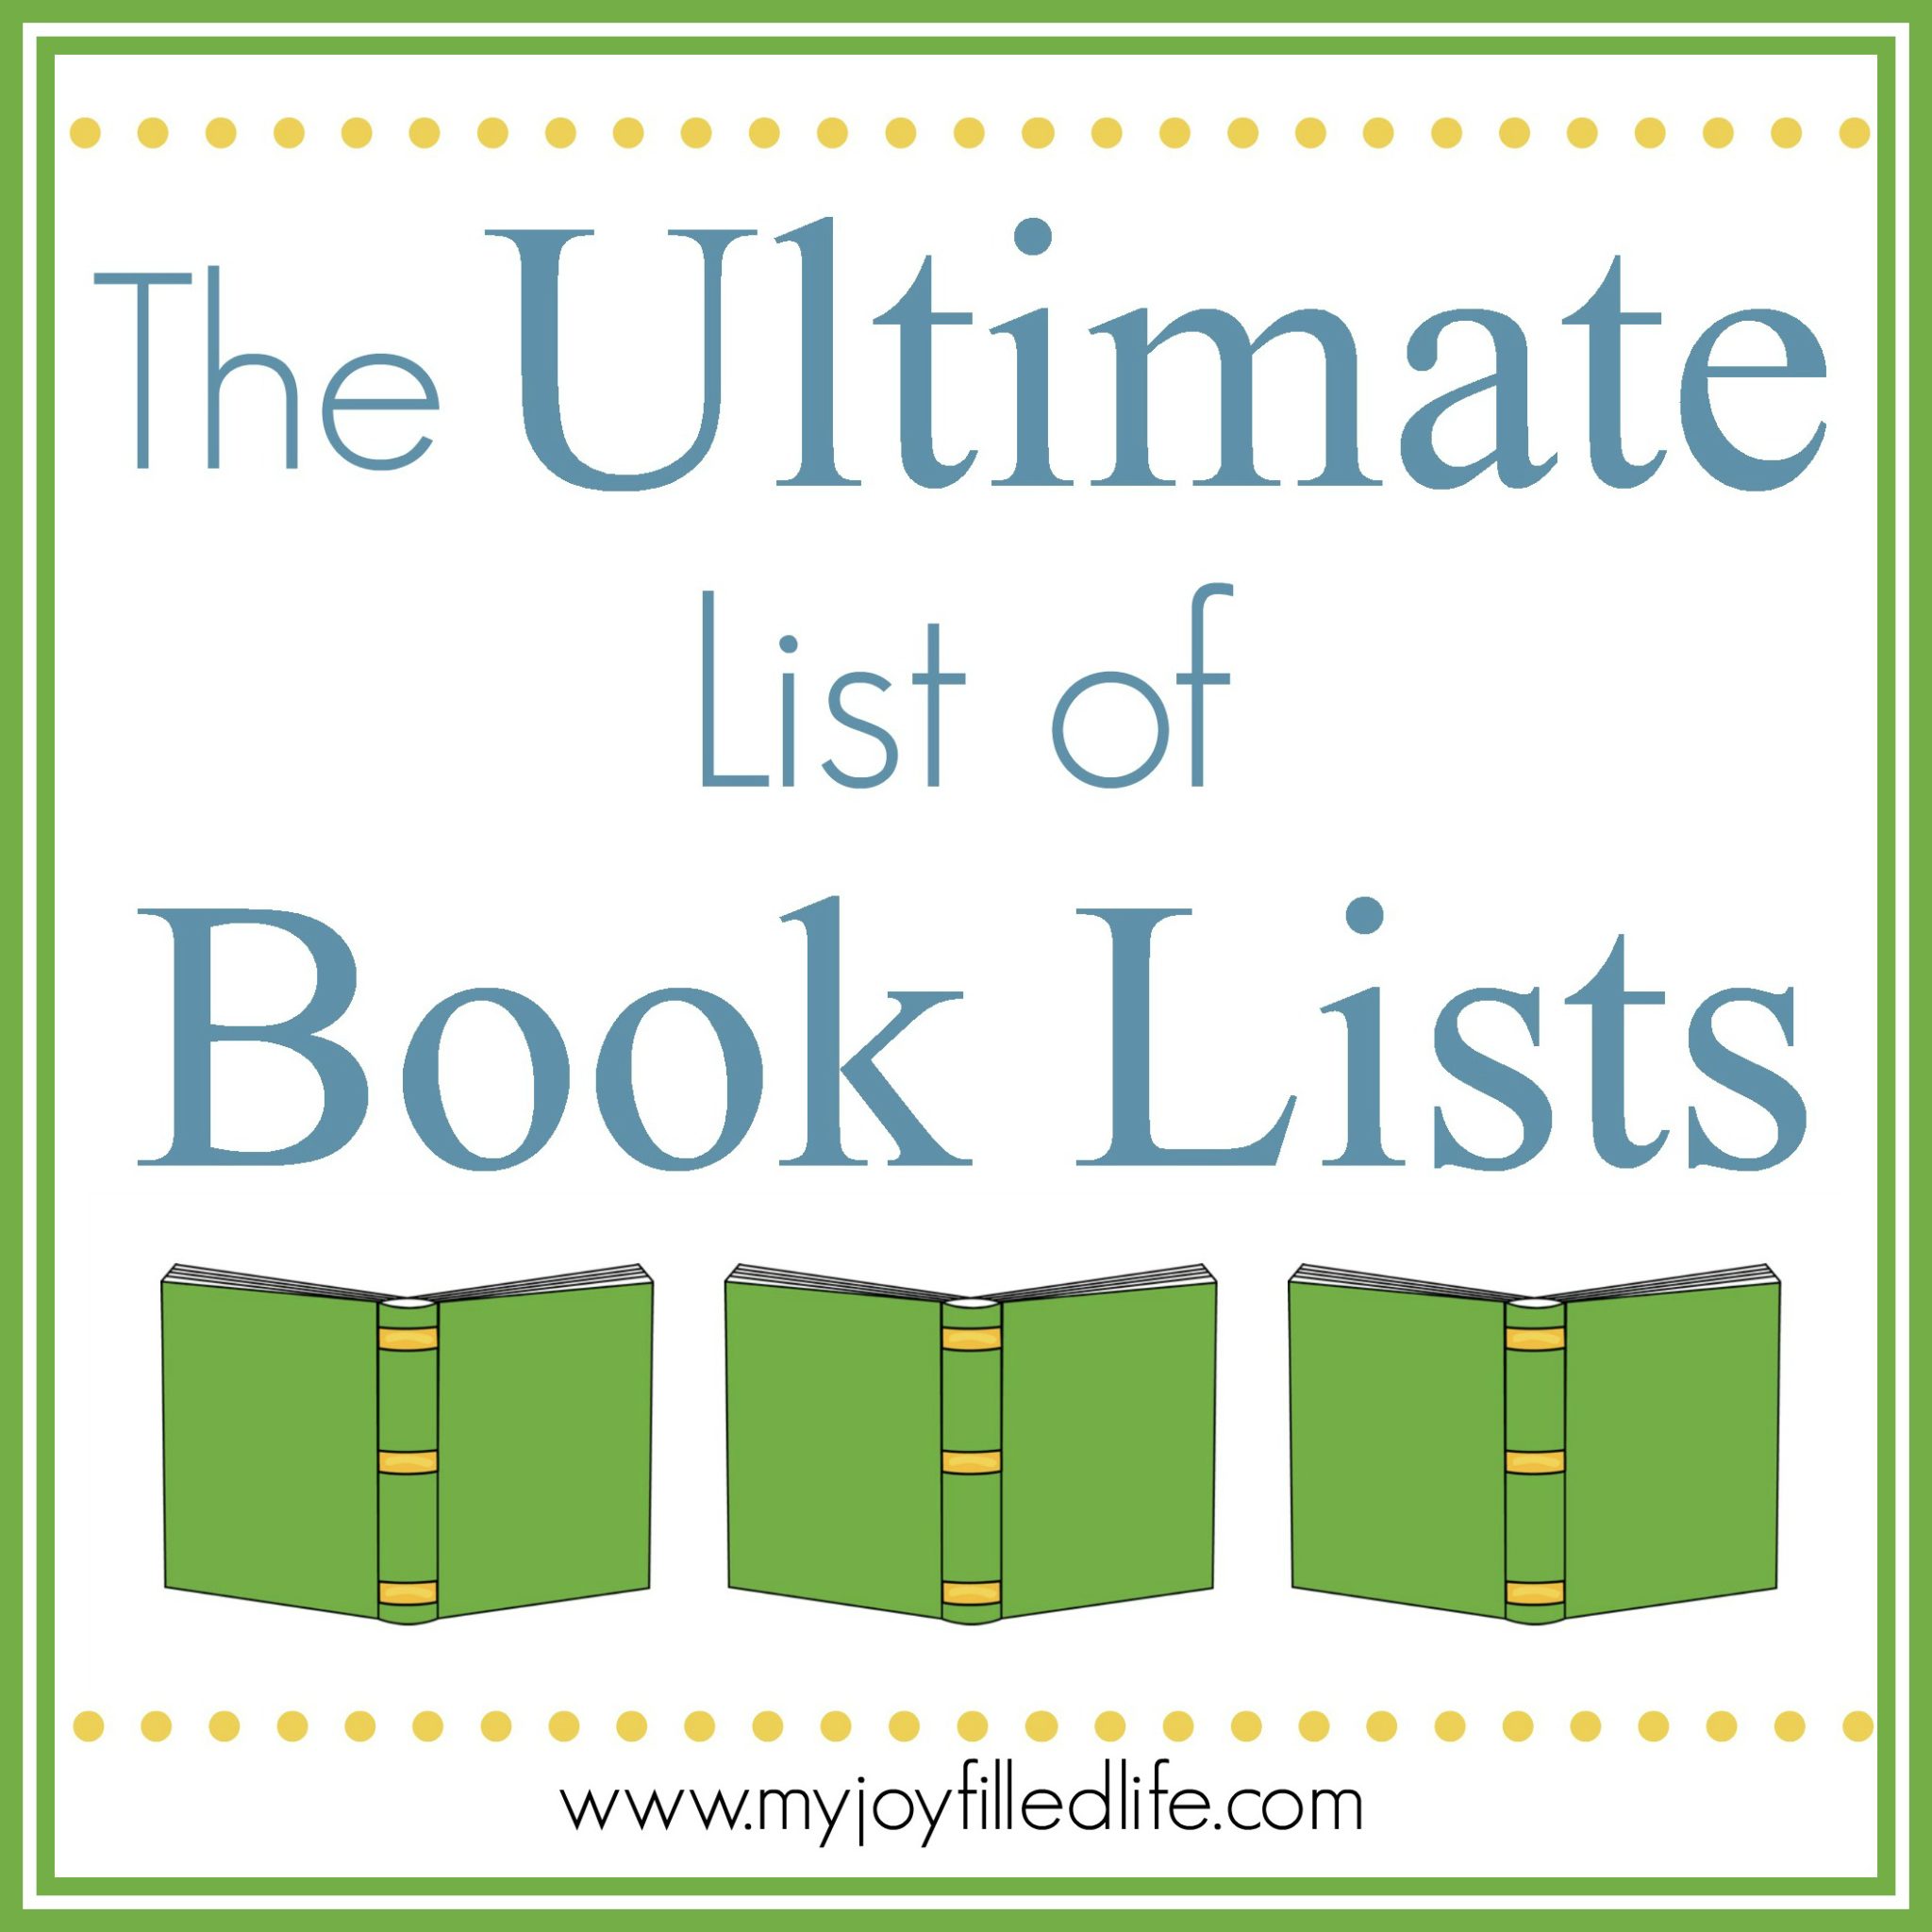 The Ultimate List of Book Lists